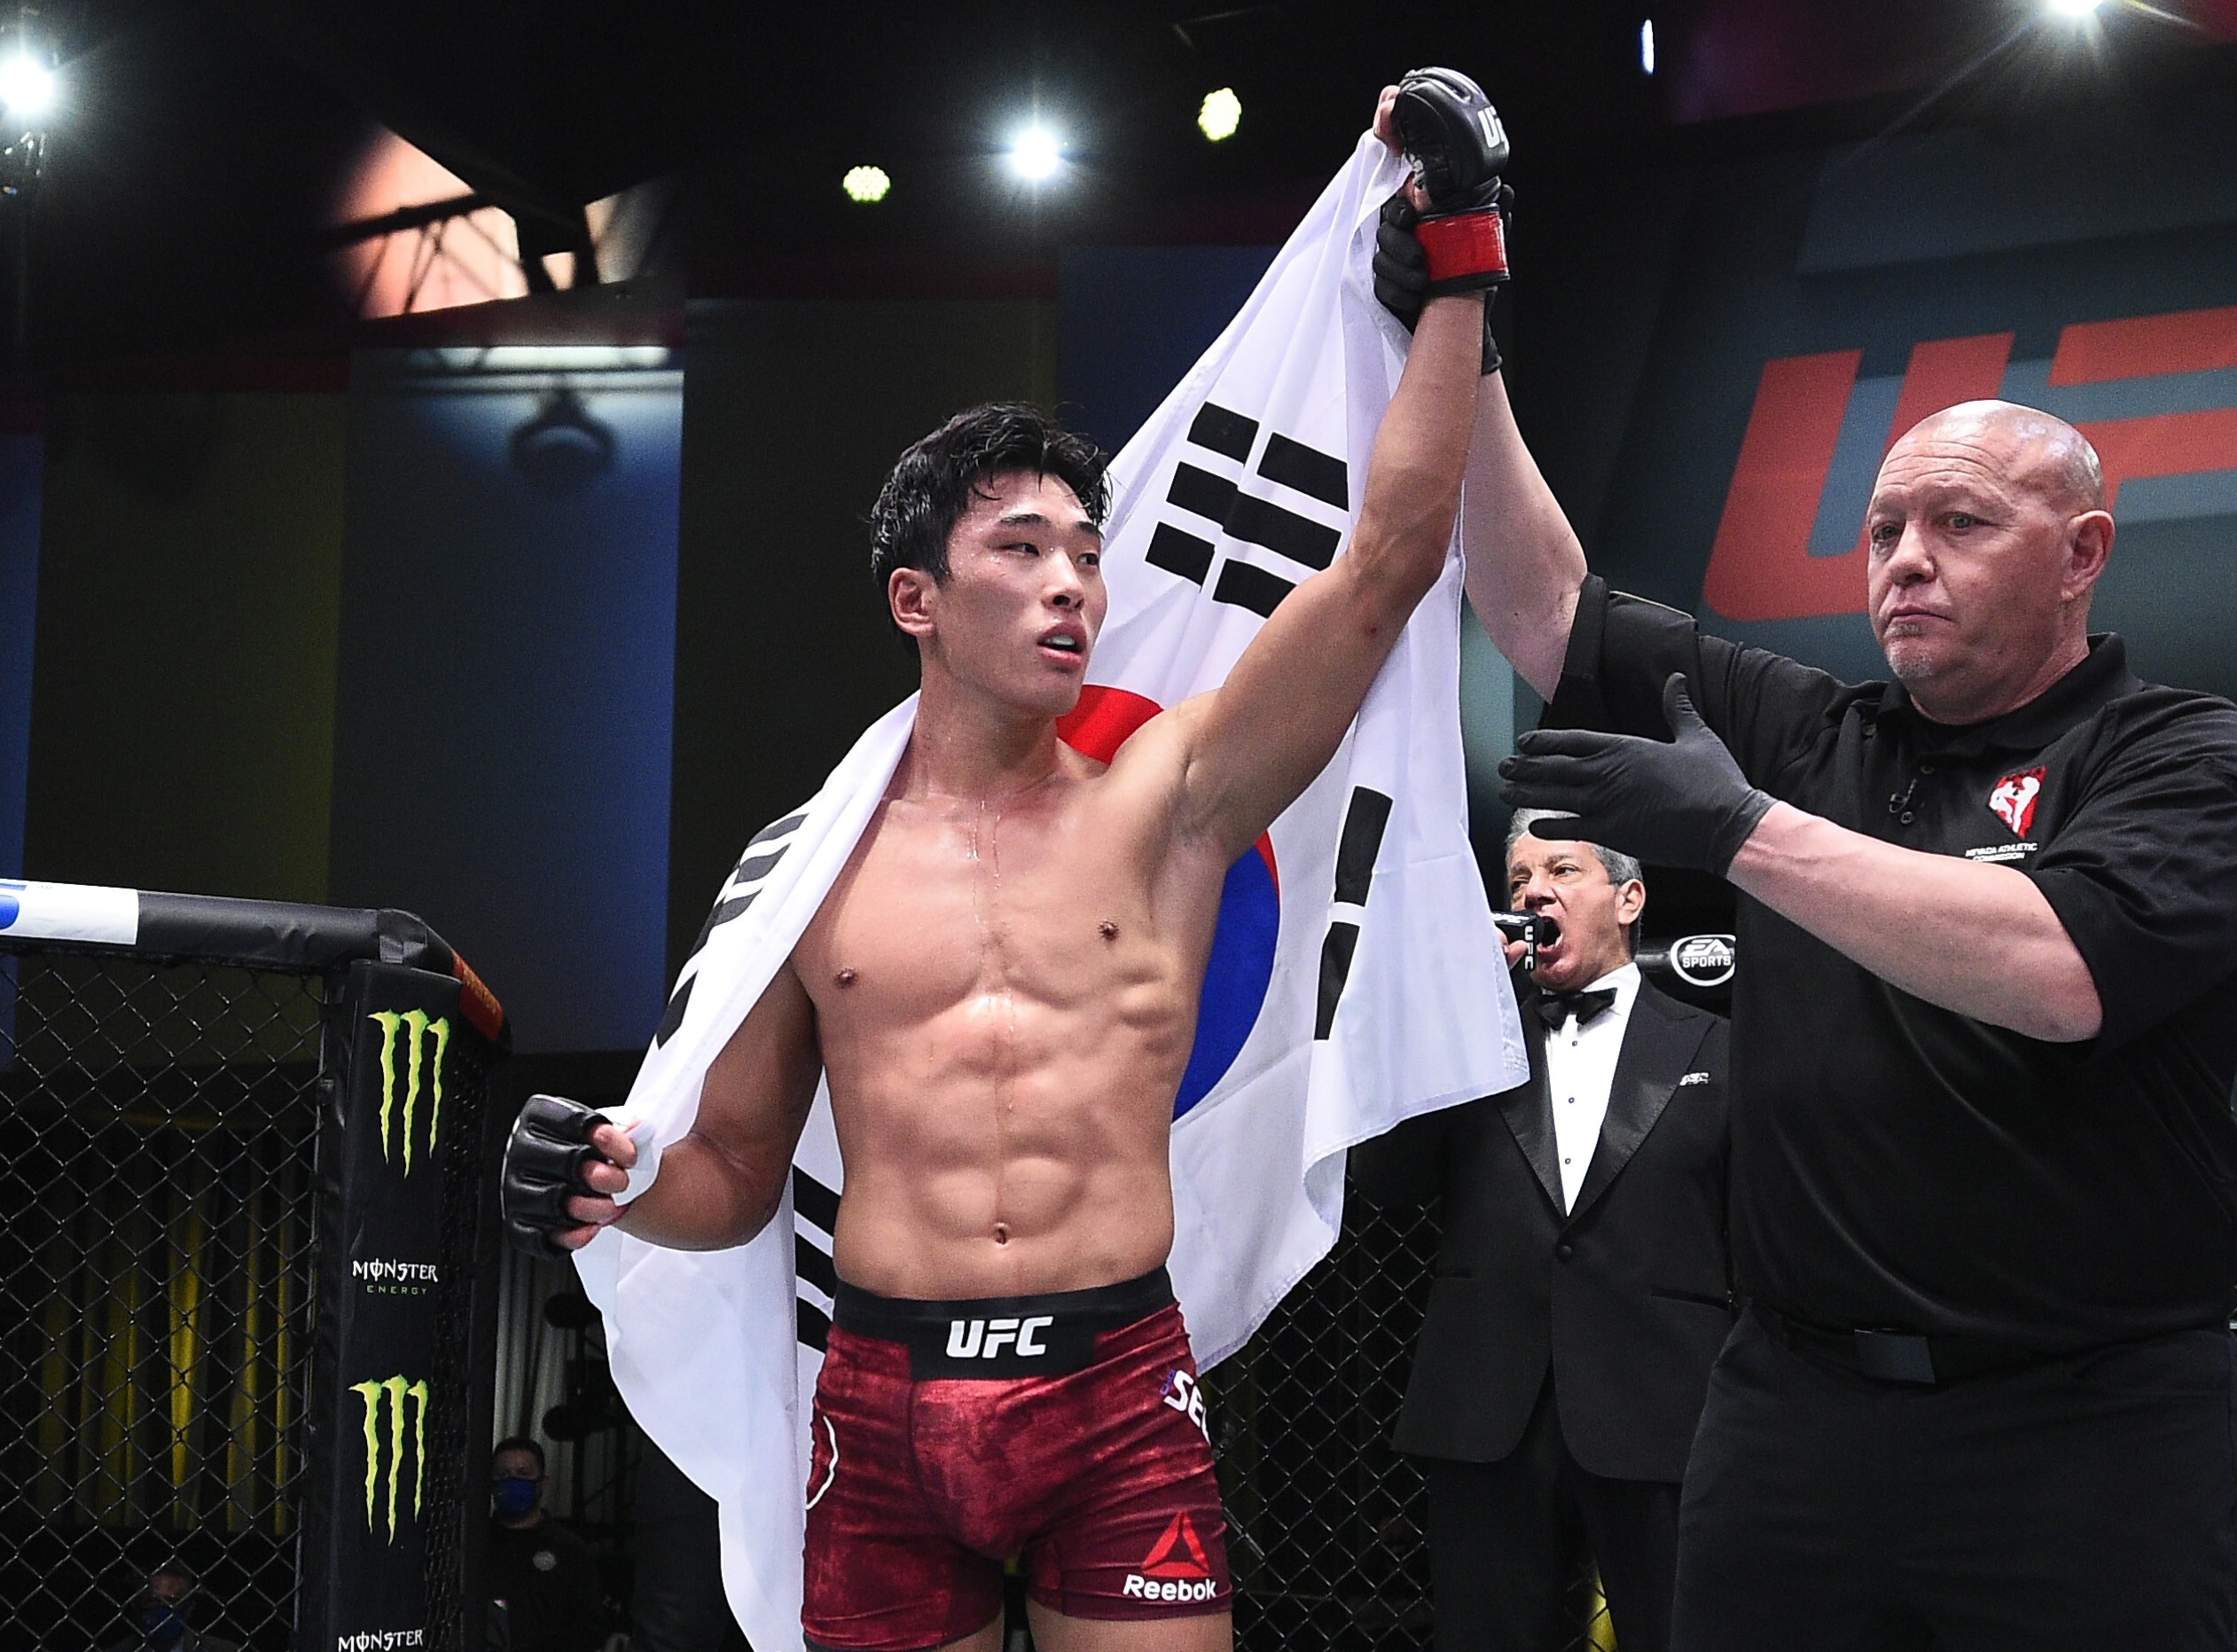 UFC: South Korean fighter Choi Seung-woo's journey from DMZ to